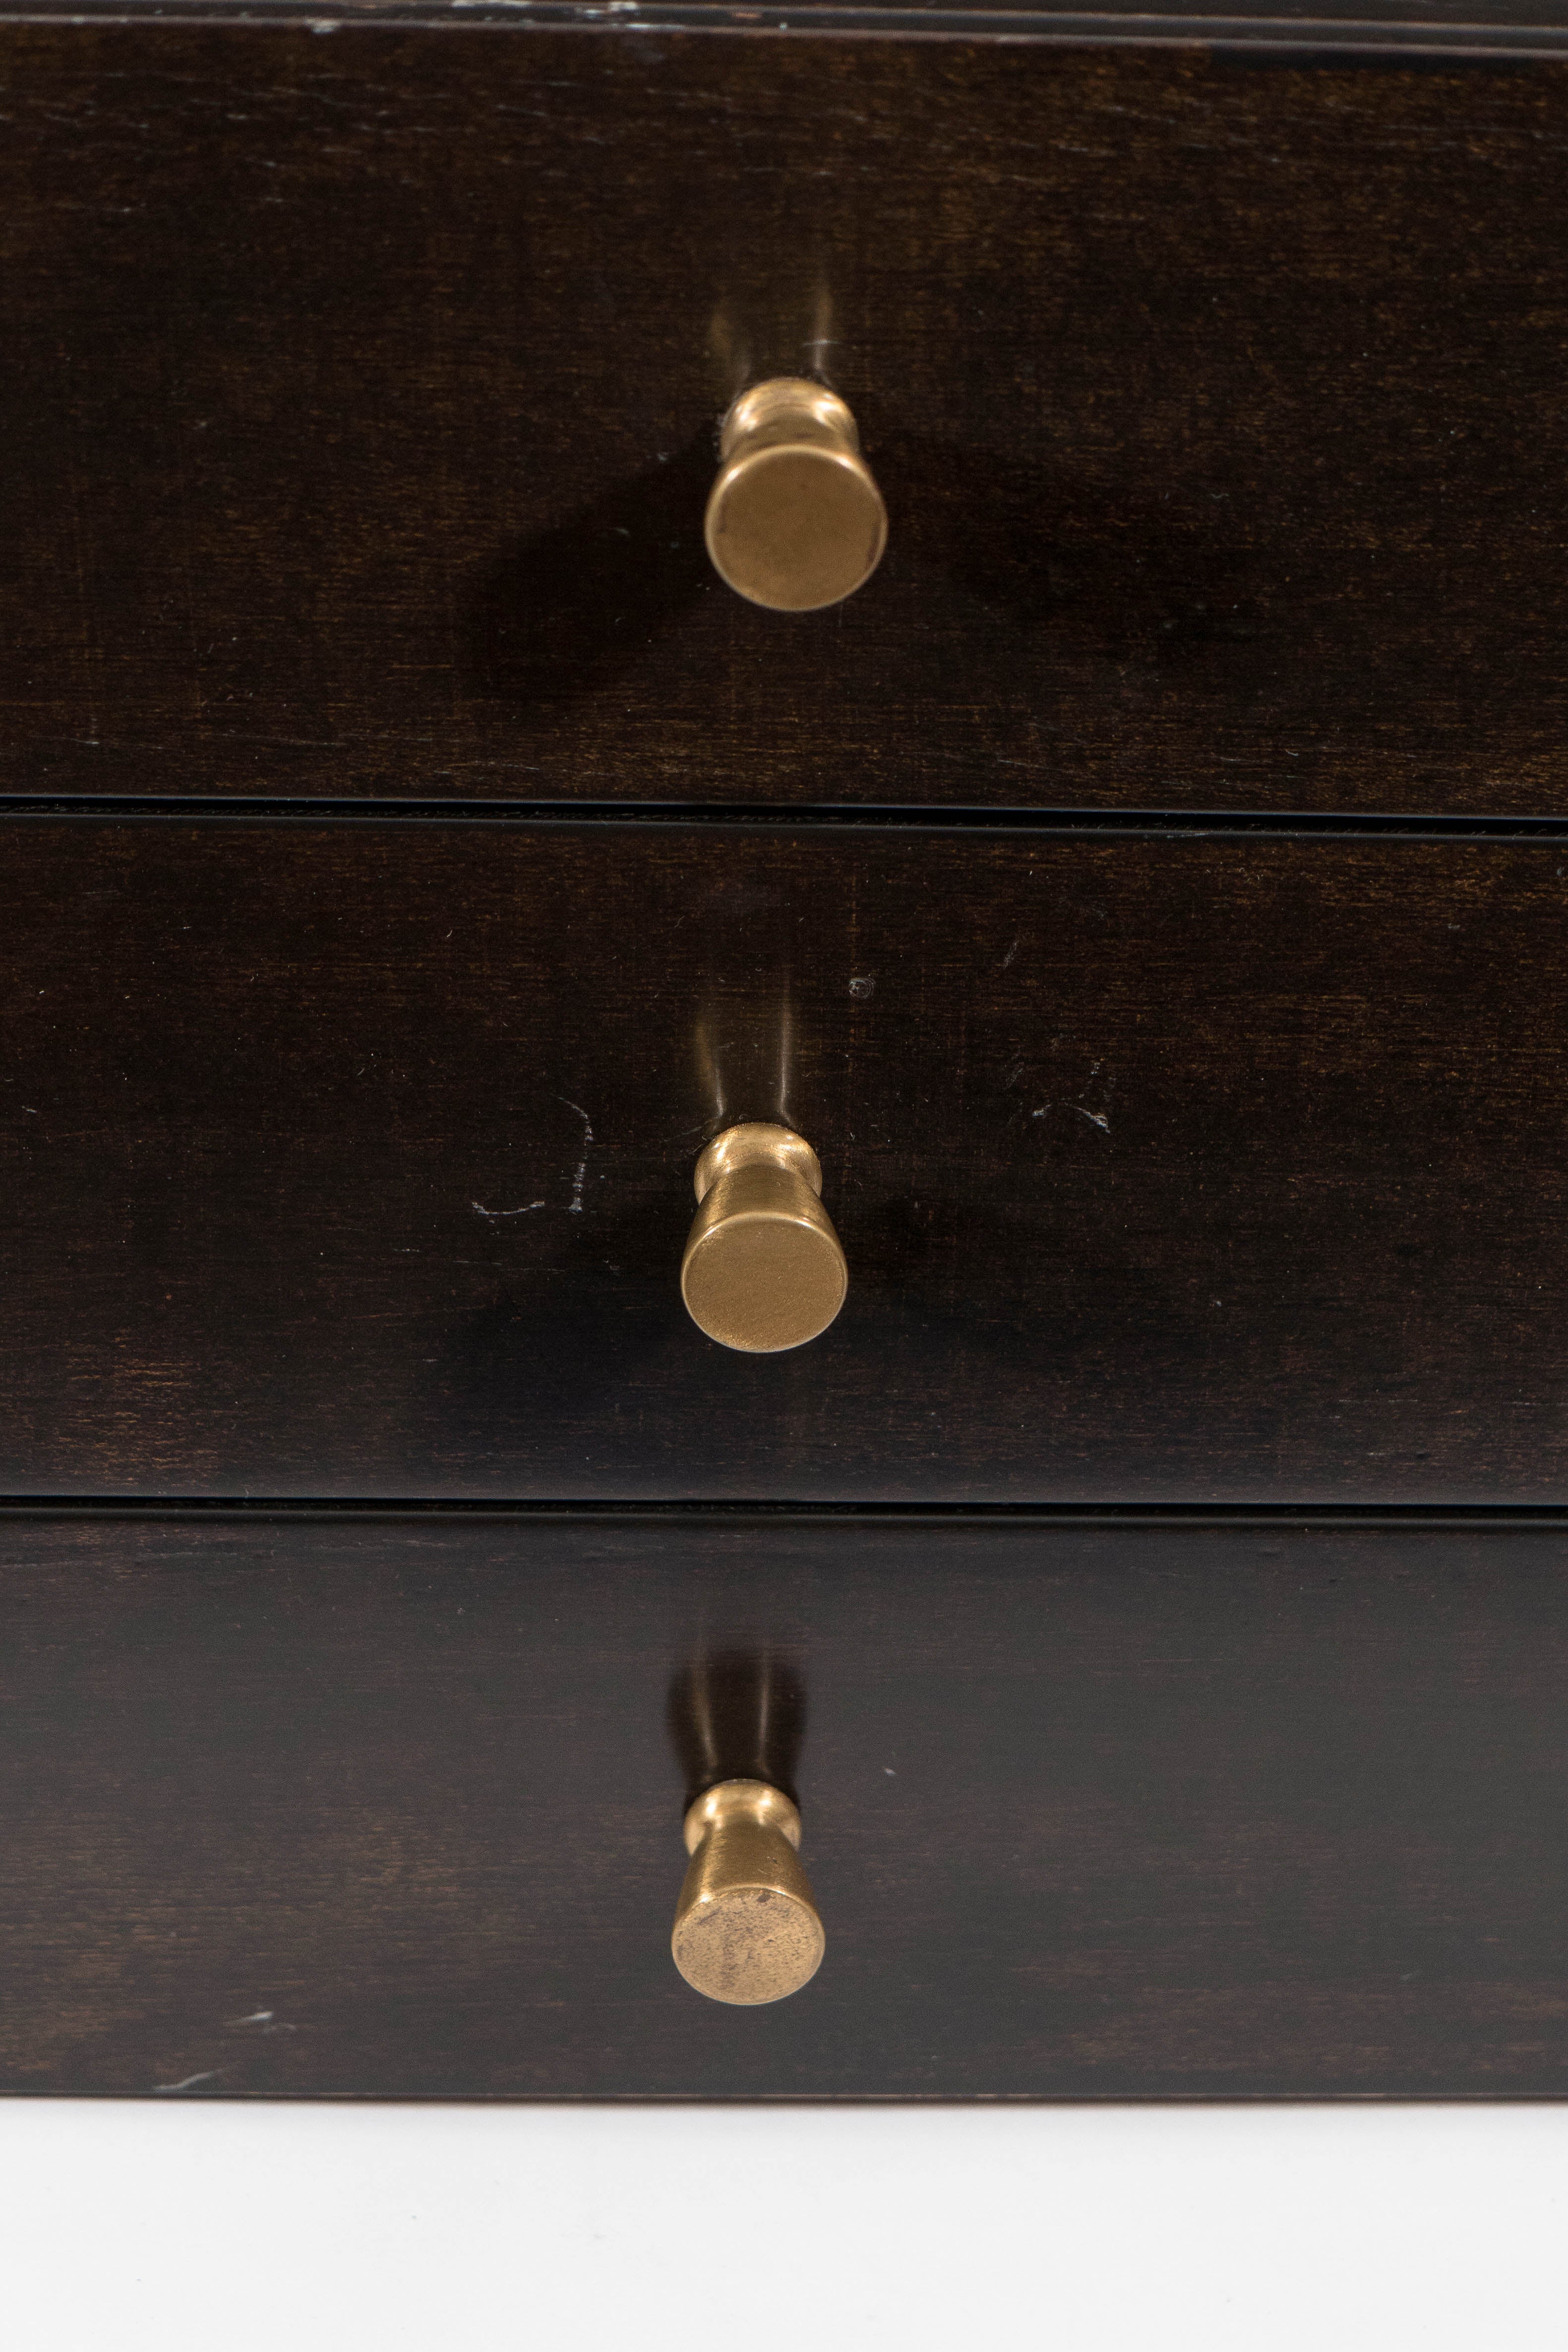 A vintage jewelry chest, designed by Paul McCobb for the Calvin Group-Irwin Collection, circa 1950's, in mahogany, with the three exterior drawers and brass knob pulls. Markings include original maker's label, inside the top drawer. Good vintage